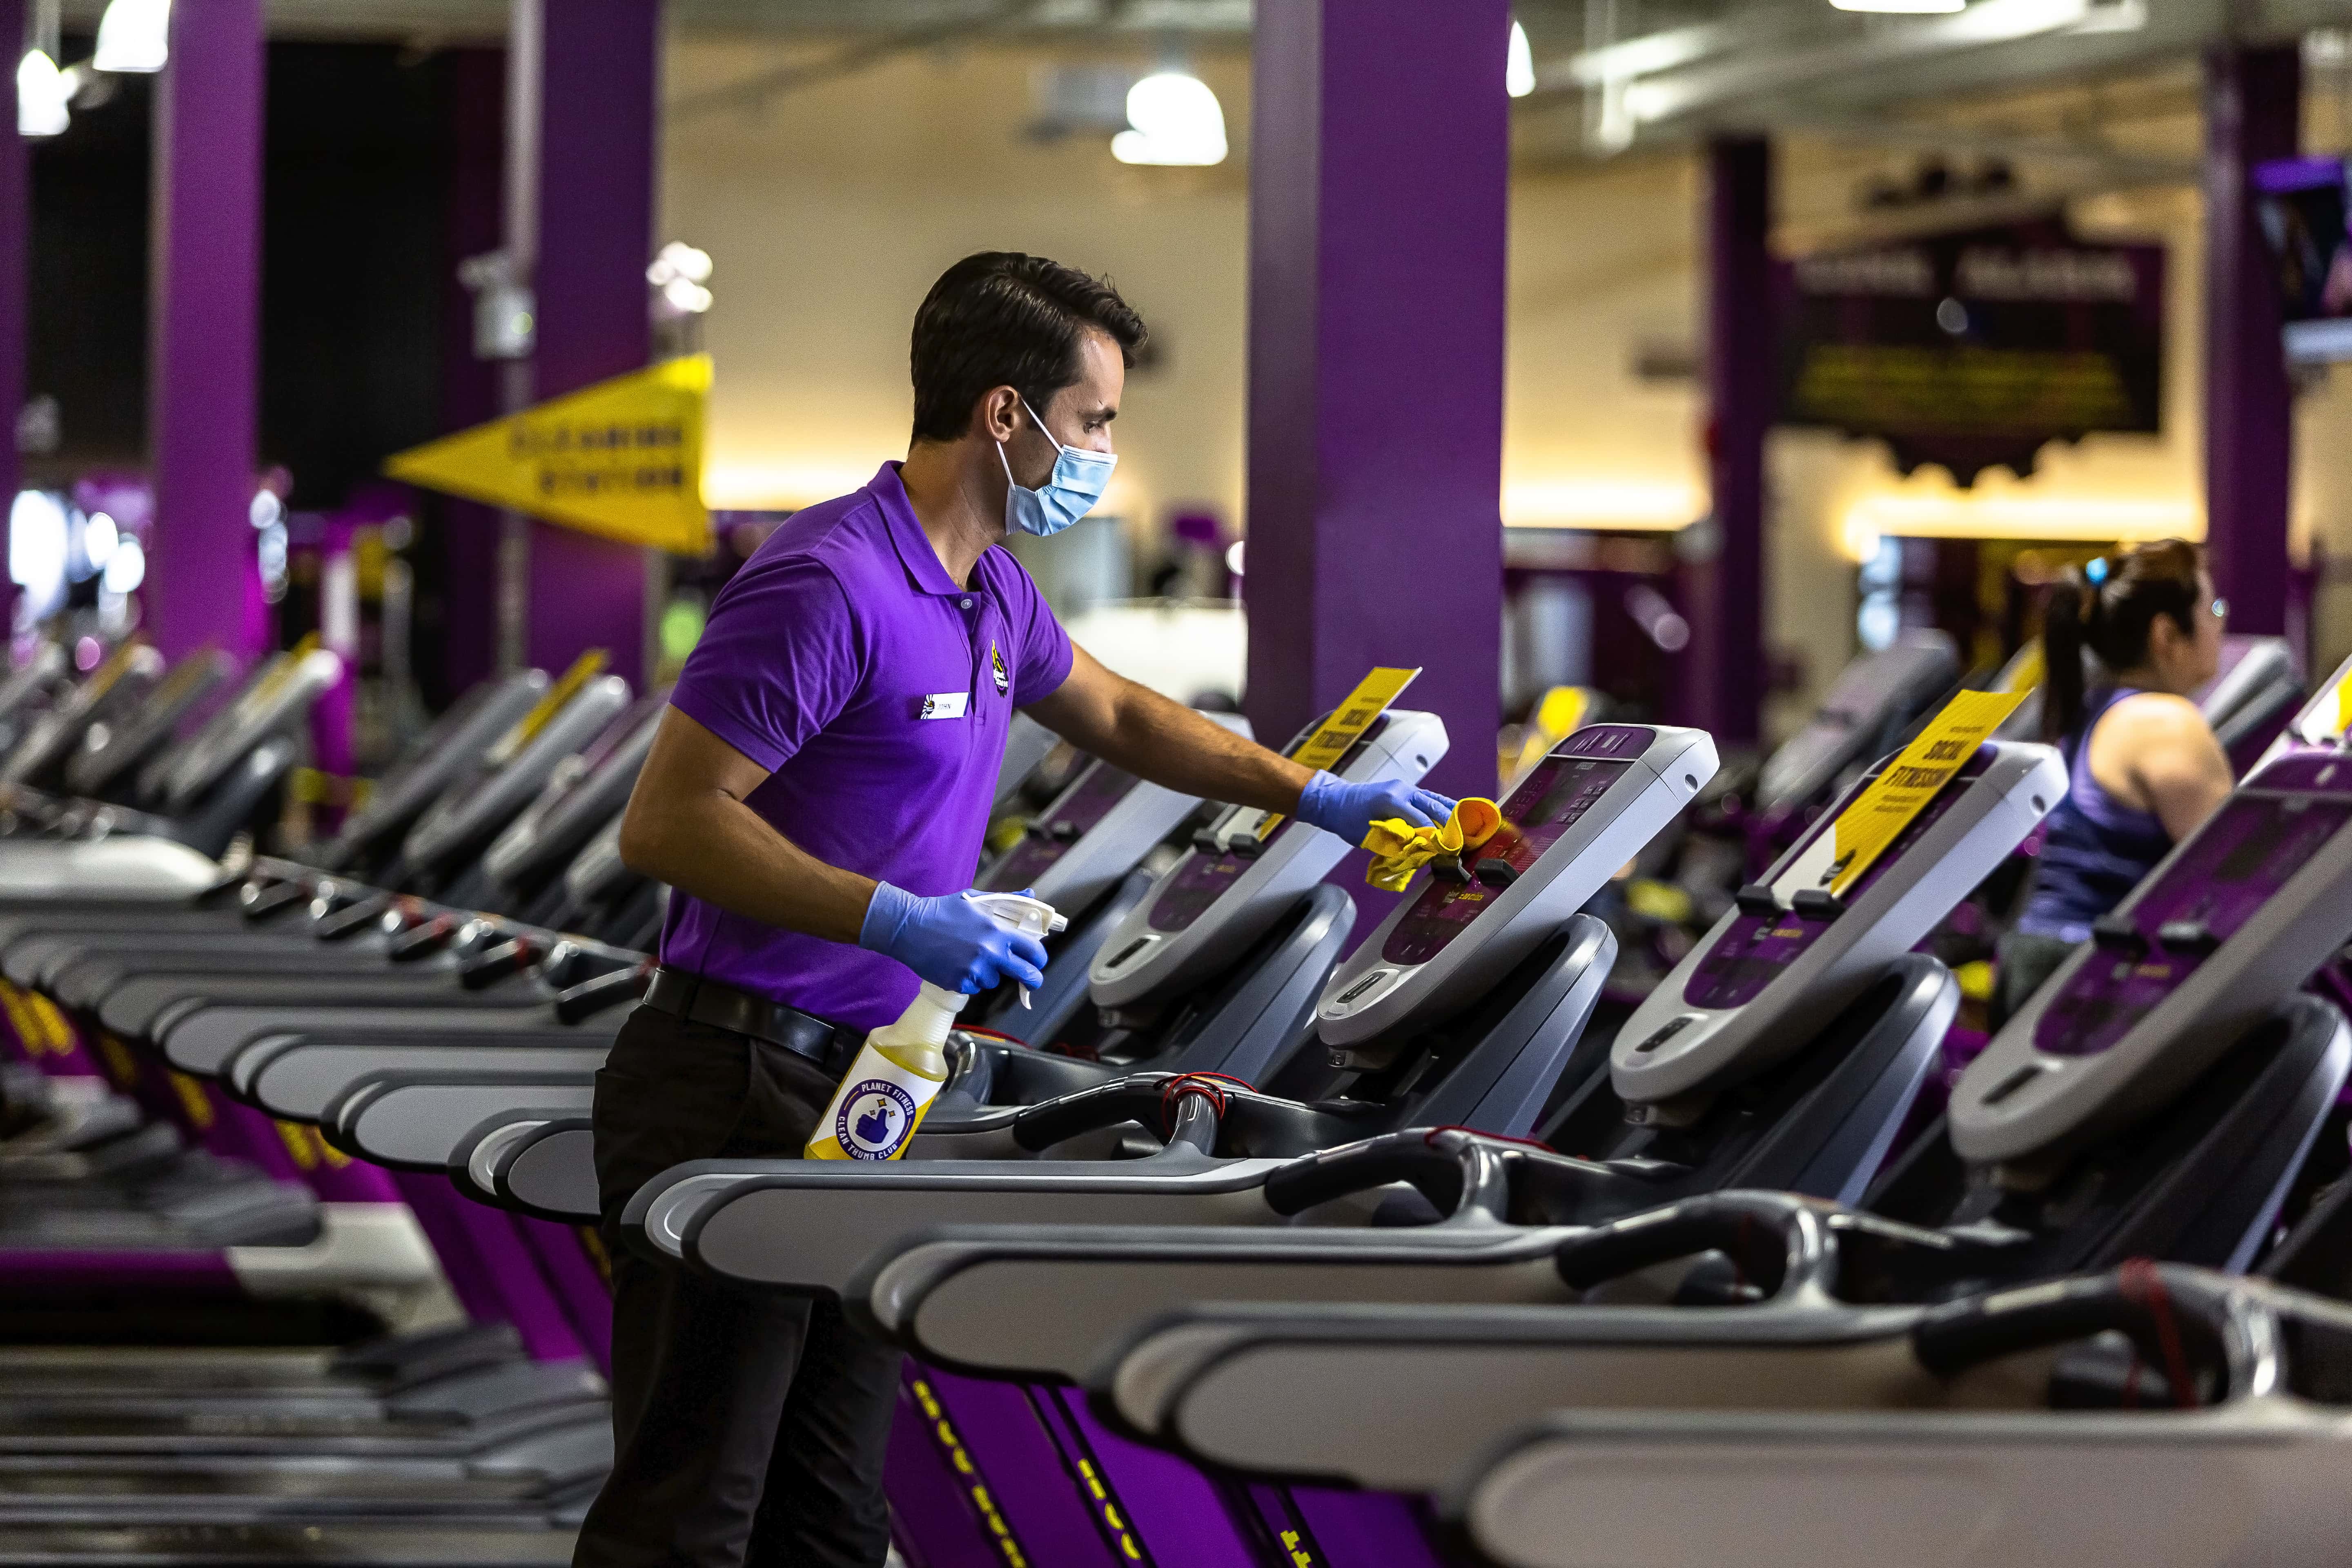 Planet Fitness - Lorain (OH 44053), US, power fitness